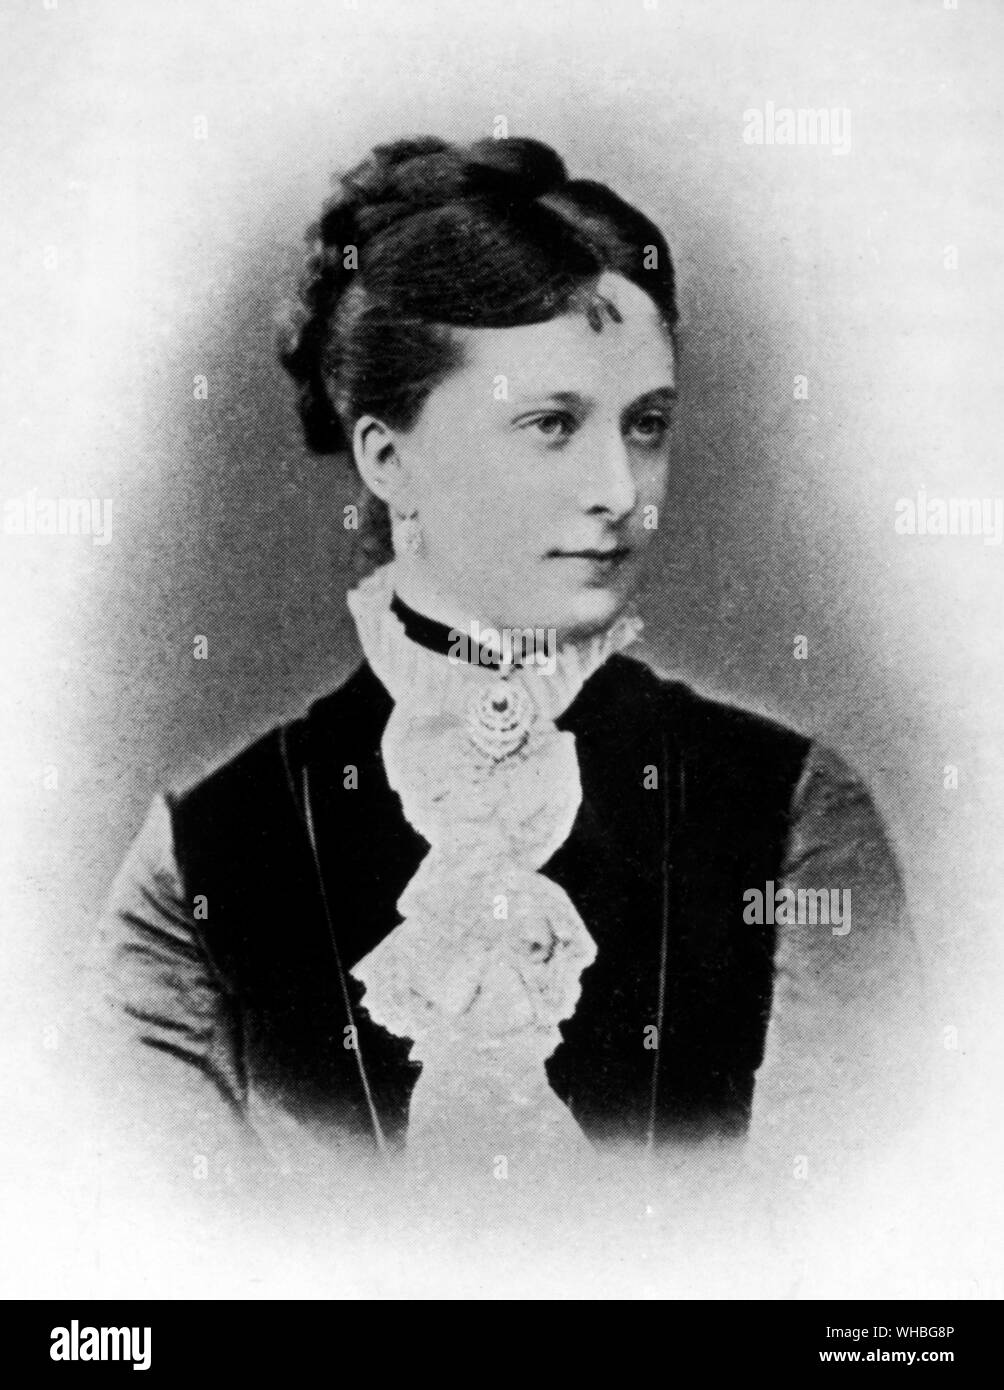 Princess Catherine Dolgoruky had an affair with the Tsar, Emperor Alexander II of all the Russias 1818 - 1881. Princess Catherine Dolgoruky (was created Princess Yurievsky) 1847 - 1922. Alexander and Catherine Dolgoruky were married just six weeks after the death of his first wife Princess Marie of Hesse and by Rhine. Alexander was assassinated in St Petersburg by a terrorists bomb.. Stock Photo